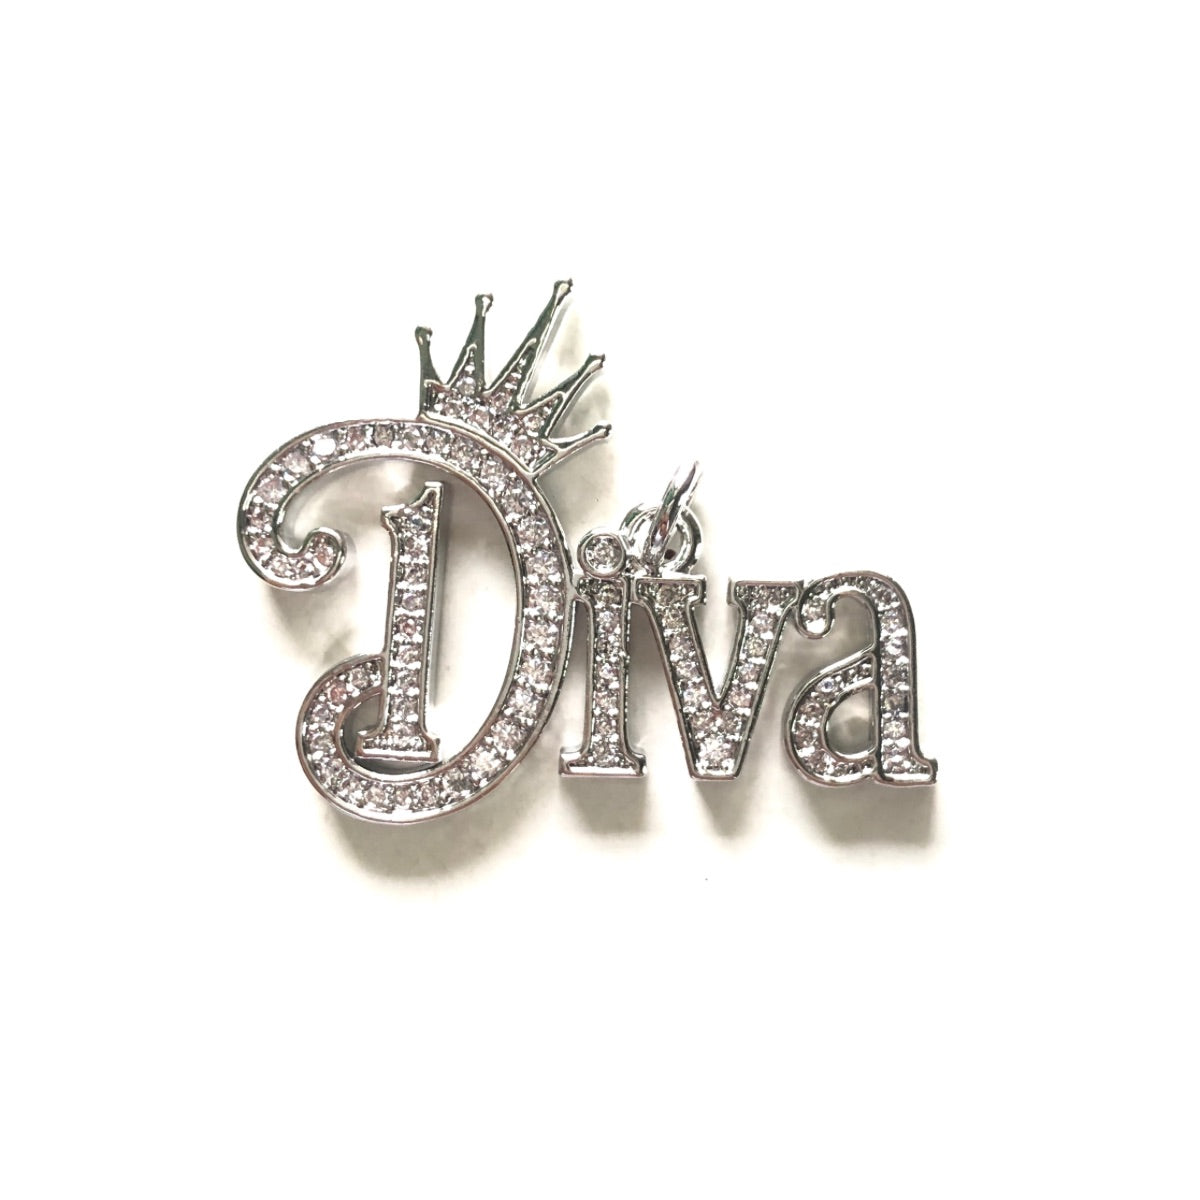 10pcs/lot 34*26.5mm CZ Pave Crown DIVA Word Charms Silver CZ Paved Charms Crowns New Charms Arrivals Words & Quotes Charms Beads Beyond